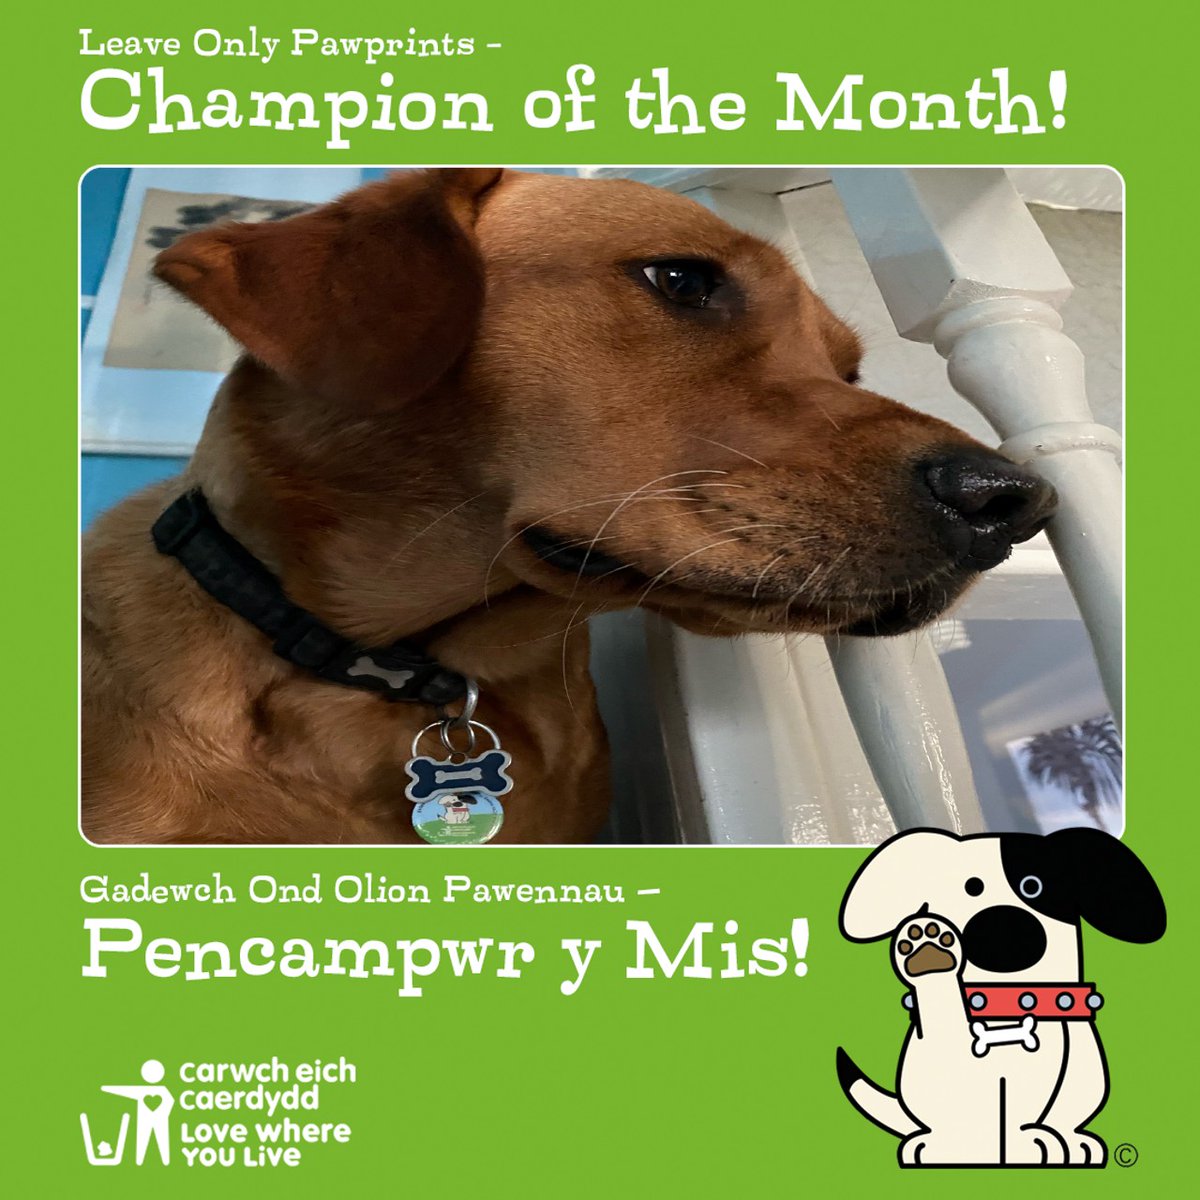 Meet Punky - our Leave Only Pawprints Champions of the Month! Thank you to all our Leave Only Pawprint Champions who keep their parks and neighbourhoods clean. Find out more and join the Champion team at orlo.uk/oEdCM